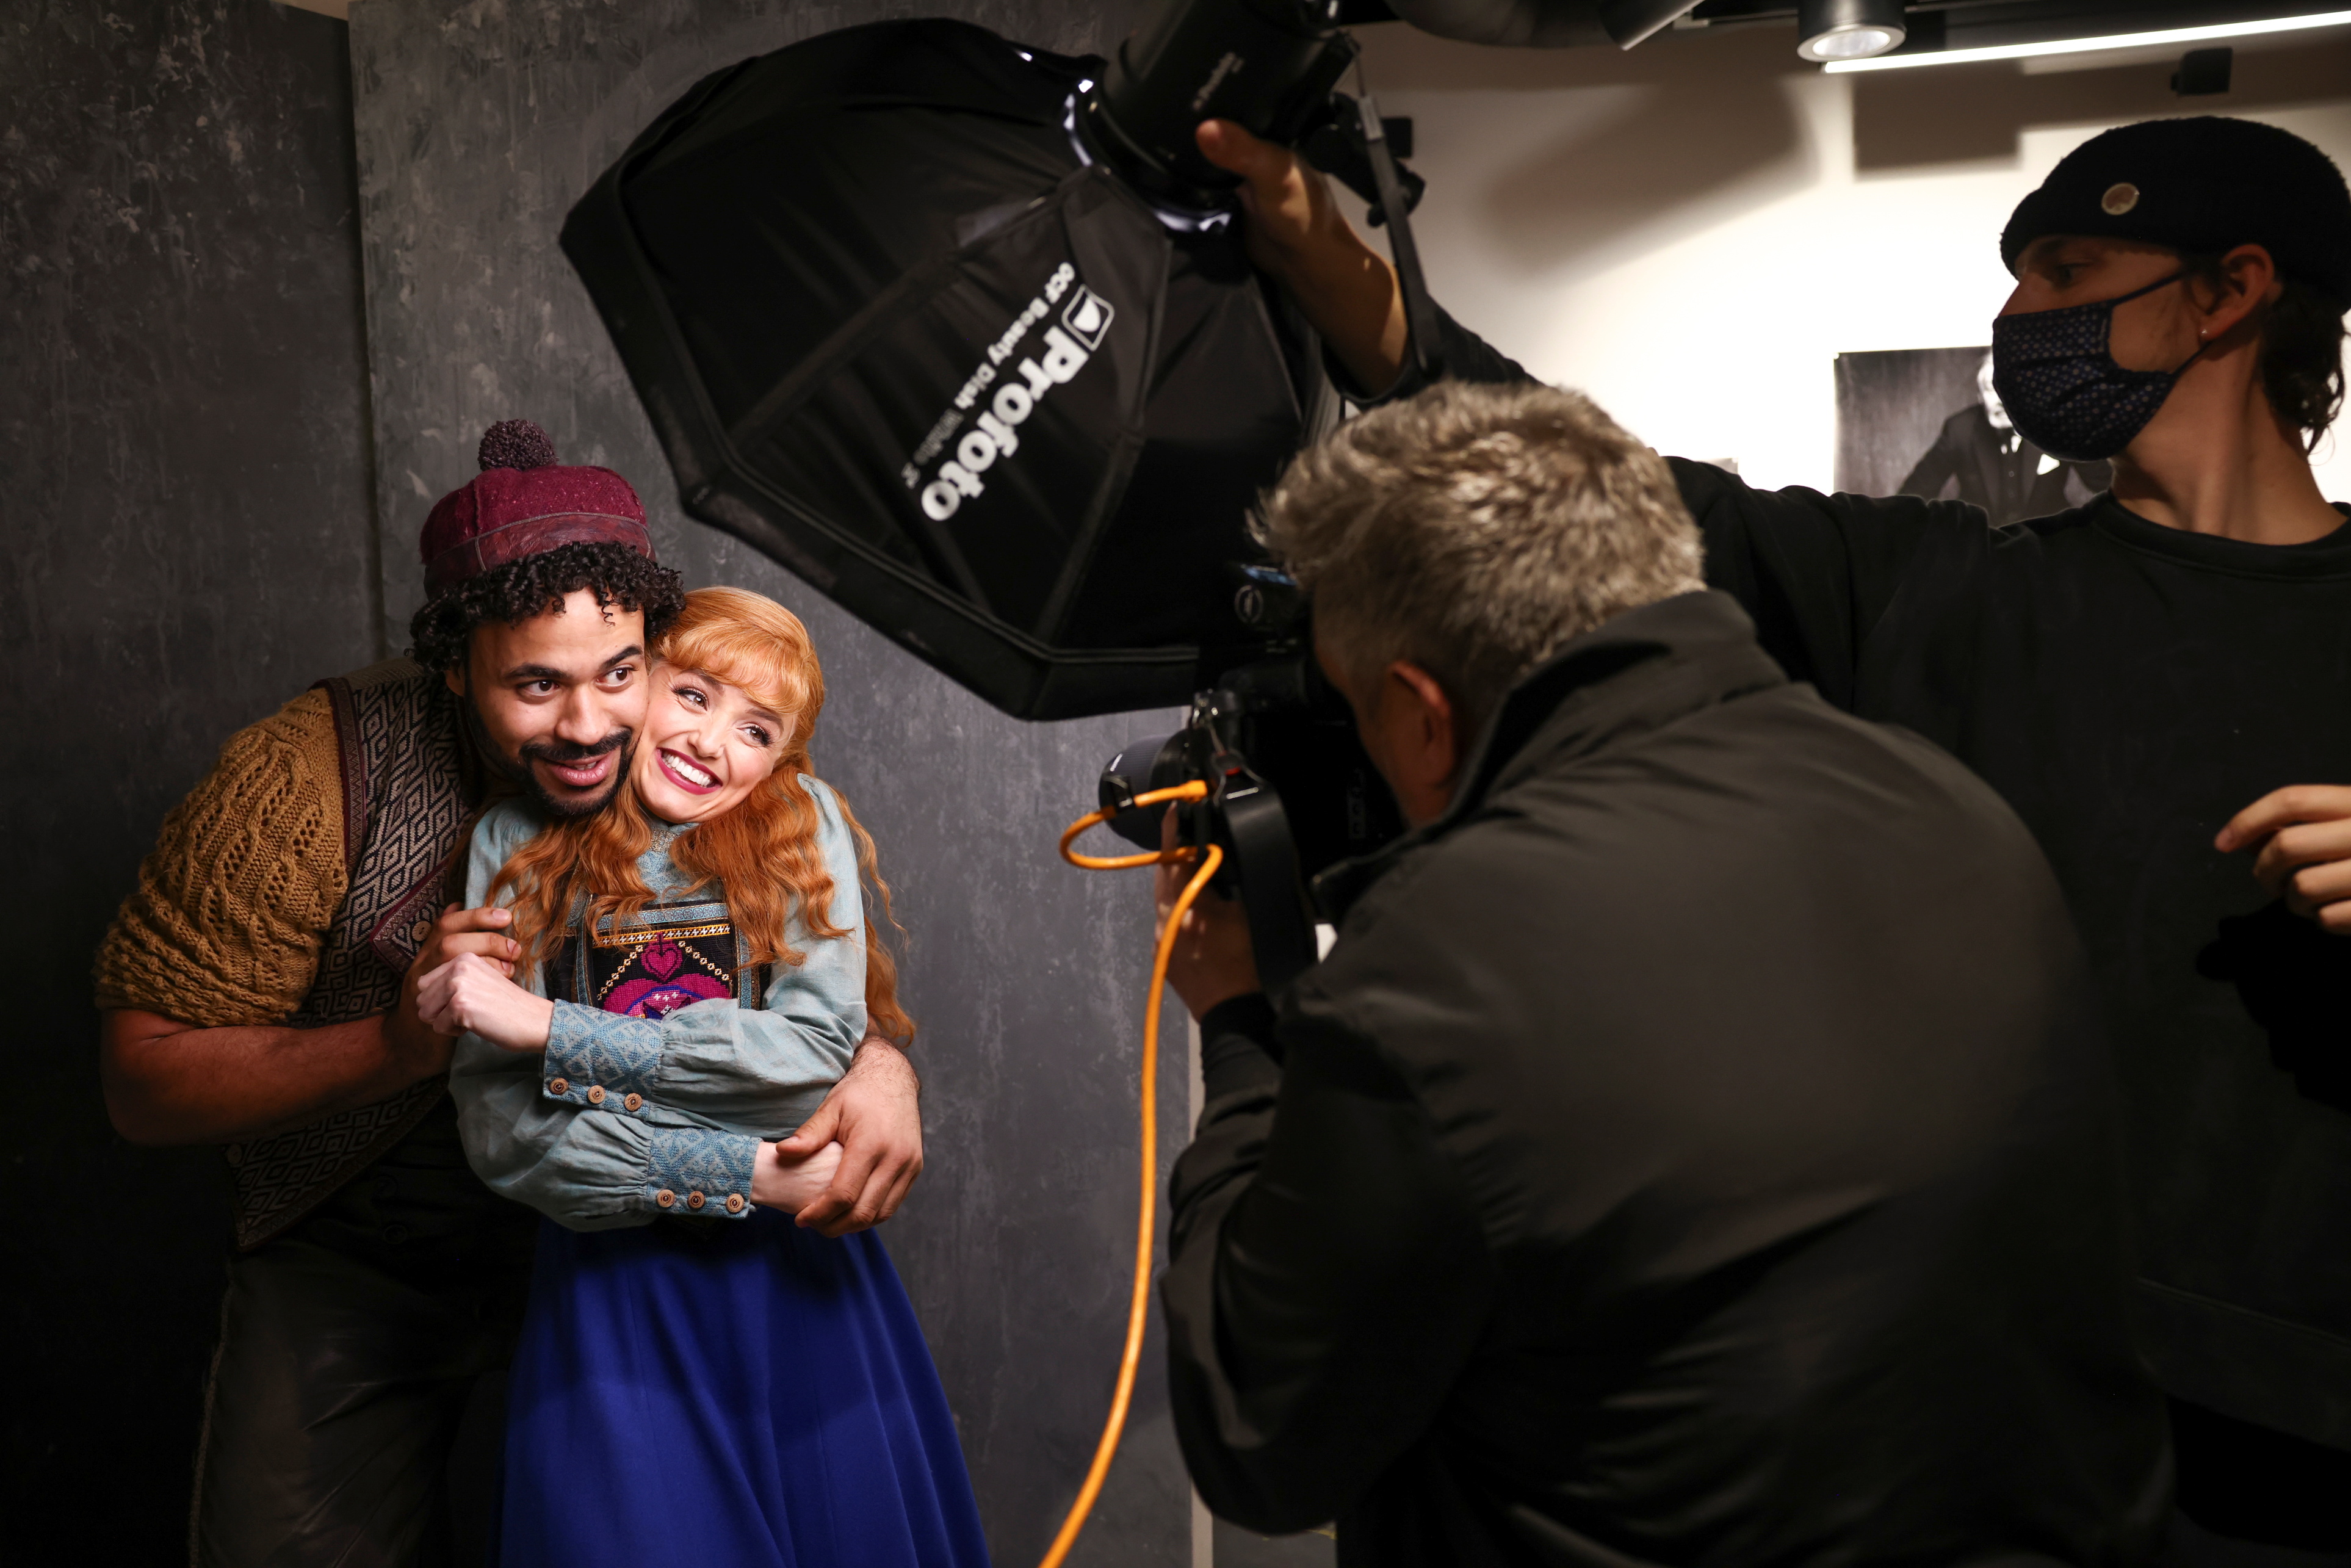 Renowned British photographer Rankin photographs cast members of Disney's West End musical 'Frozen' for his 'Performance by Rankin' series, in London, Britain, November 3, 2021. REUTERS/Henry Nicholls